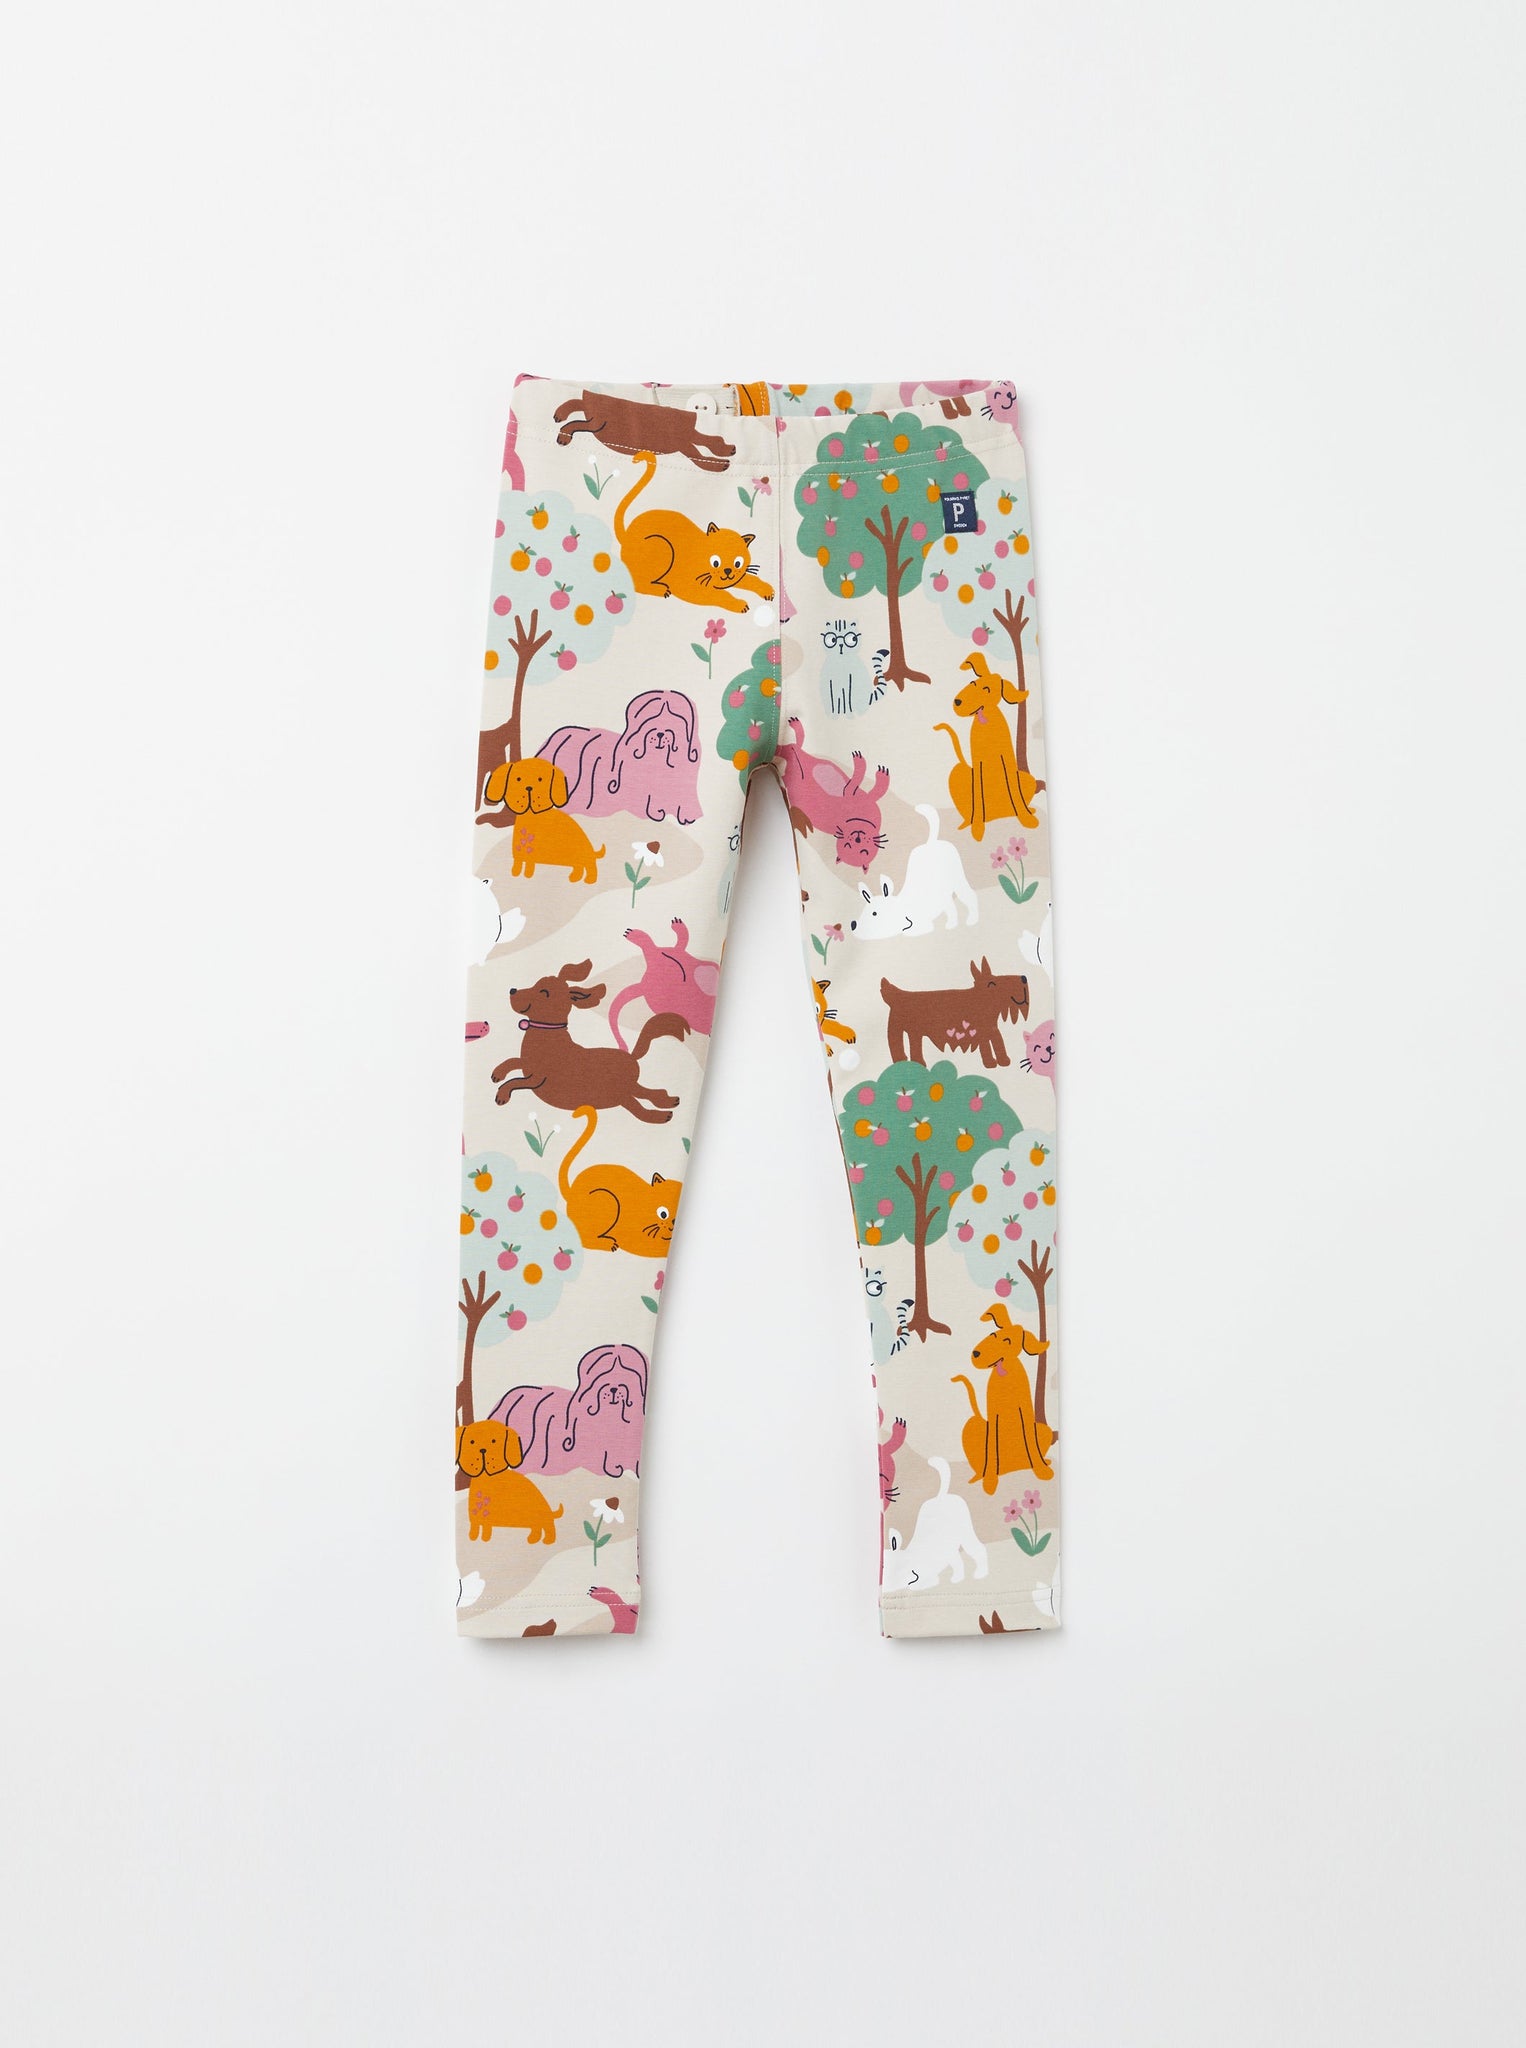 Cat & Dog Print Beige Kids Leggings from the Polarn O. Pyret Kidswear collection. Clothes made using sustainably sourced materials.